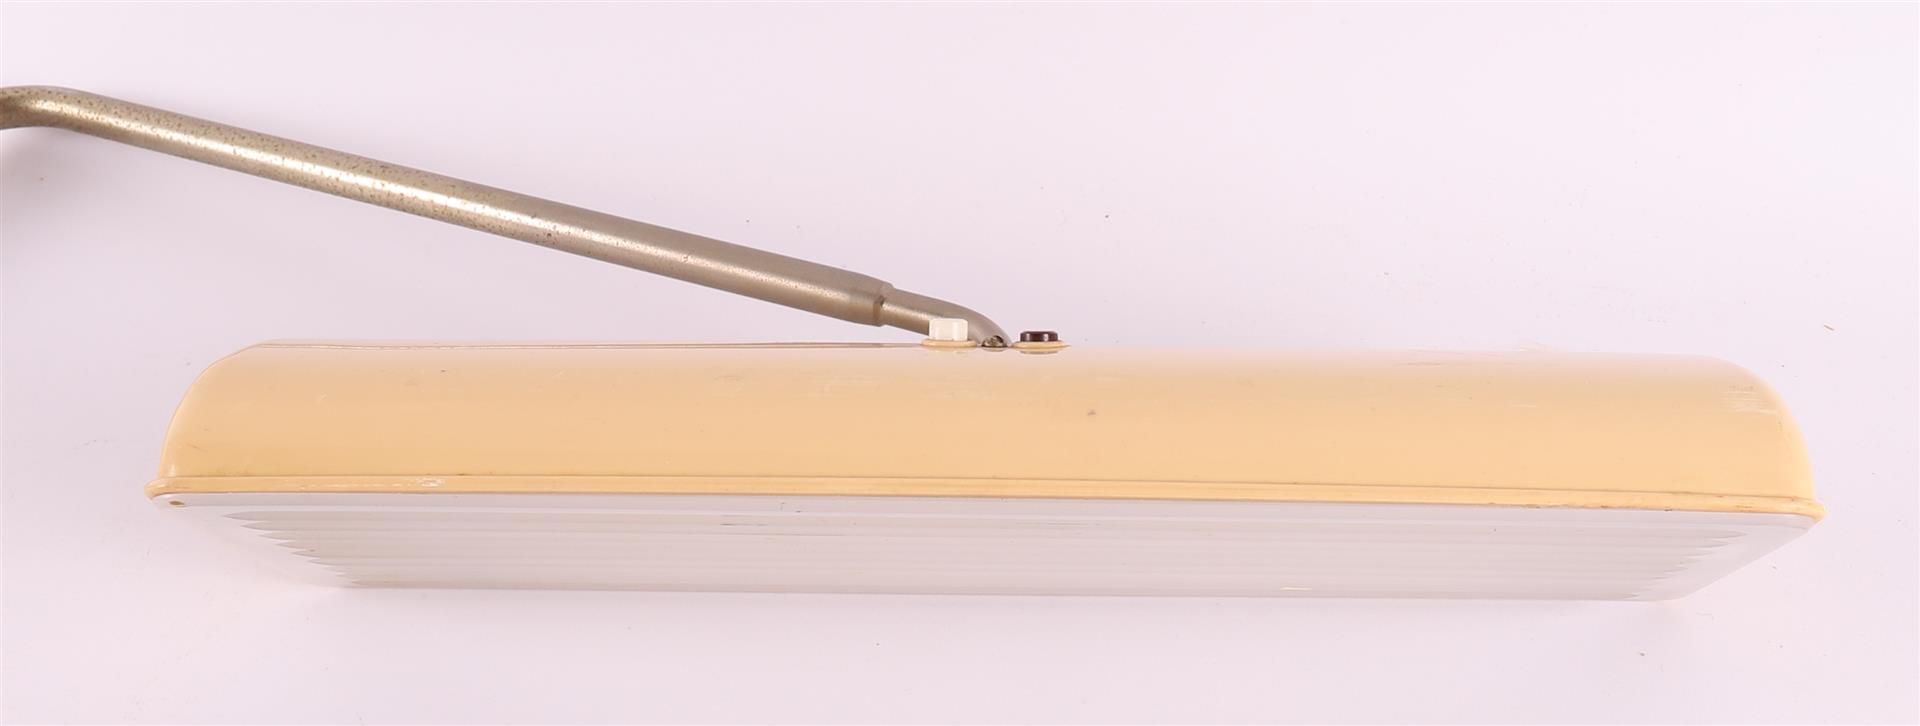 A white plastic and chrome metal vintage design desk lamp, Germany, Waldman type ST 208, 1970s. - Image 2 of 2